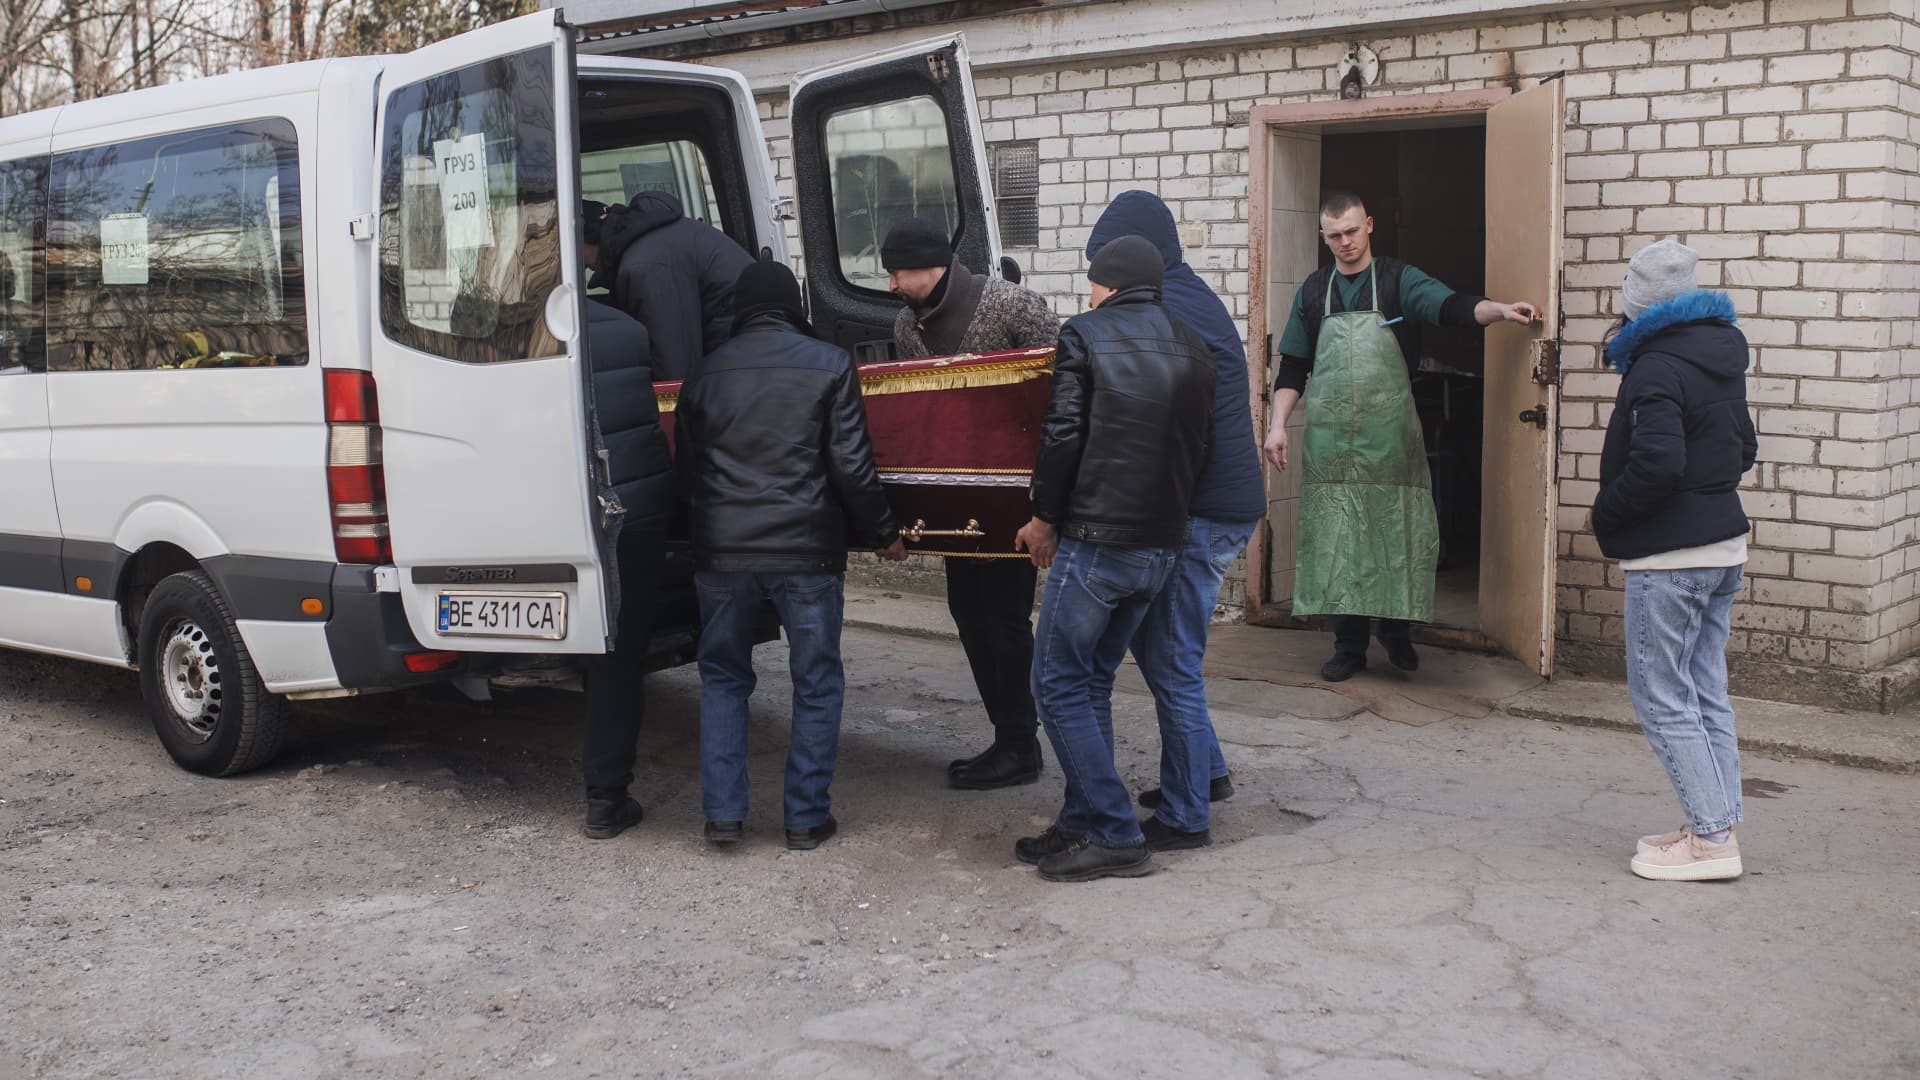 Workers load a coffin of a Ukrainian soldier onto a car at the morgue in Mykolaiv, Ukraine on March 18, 2022.